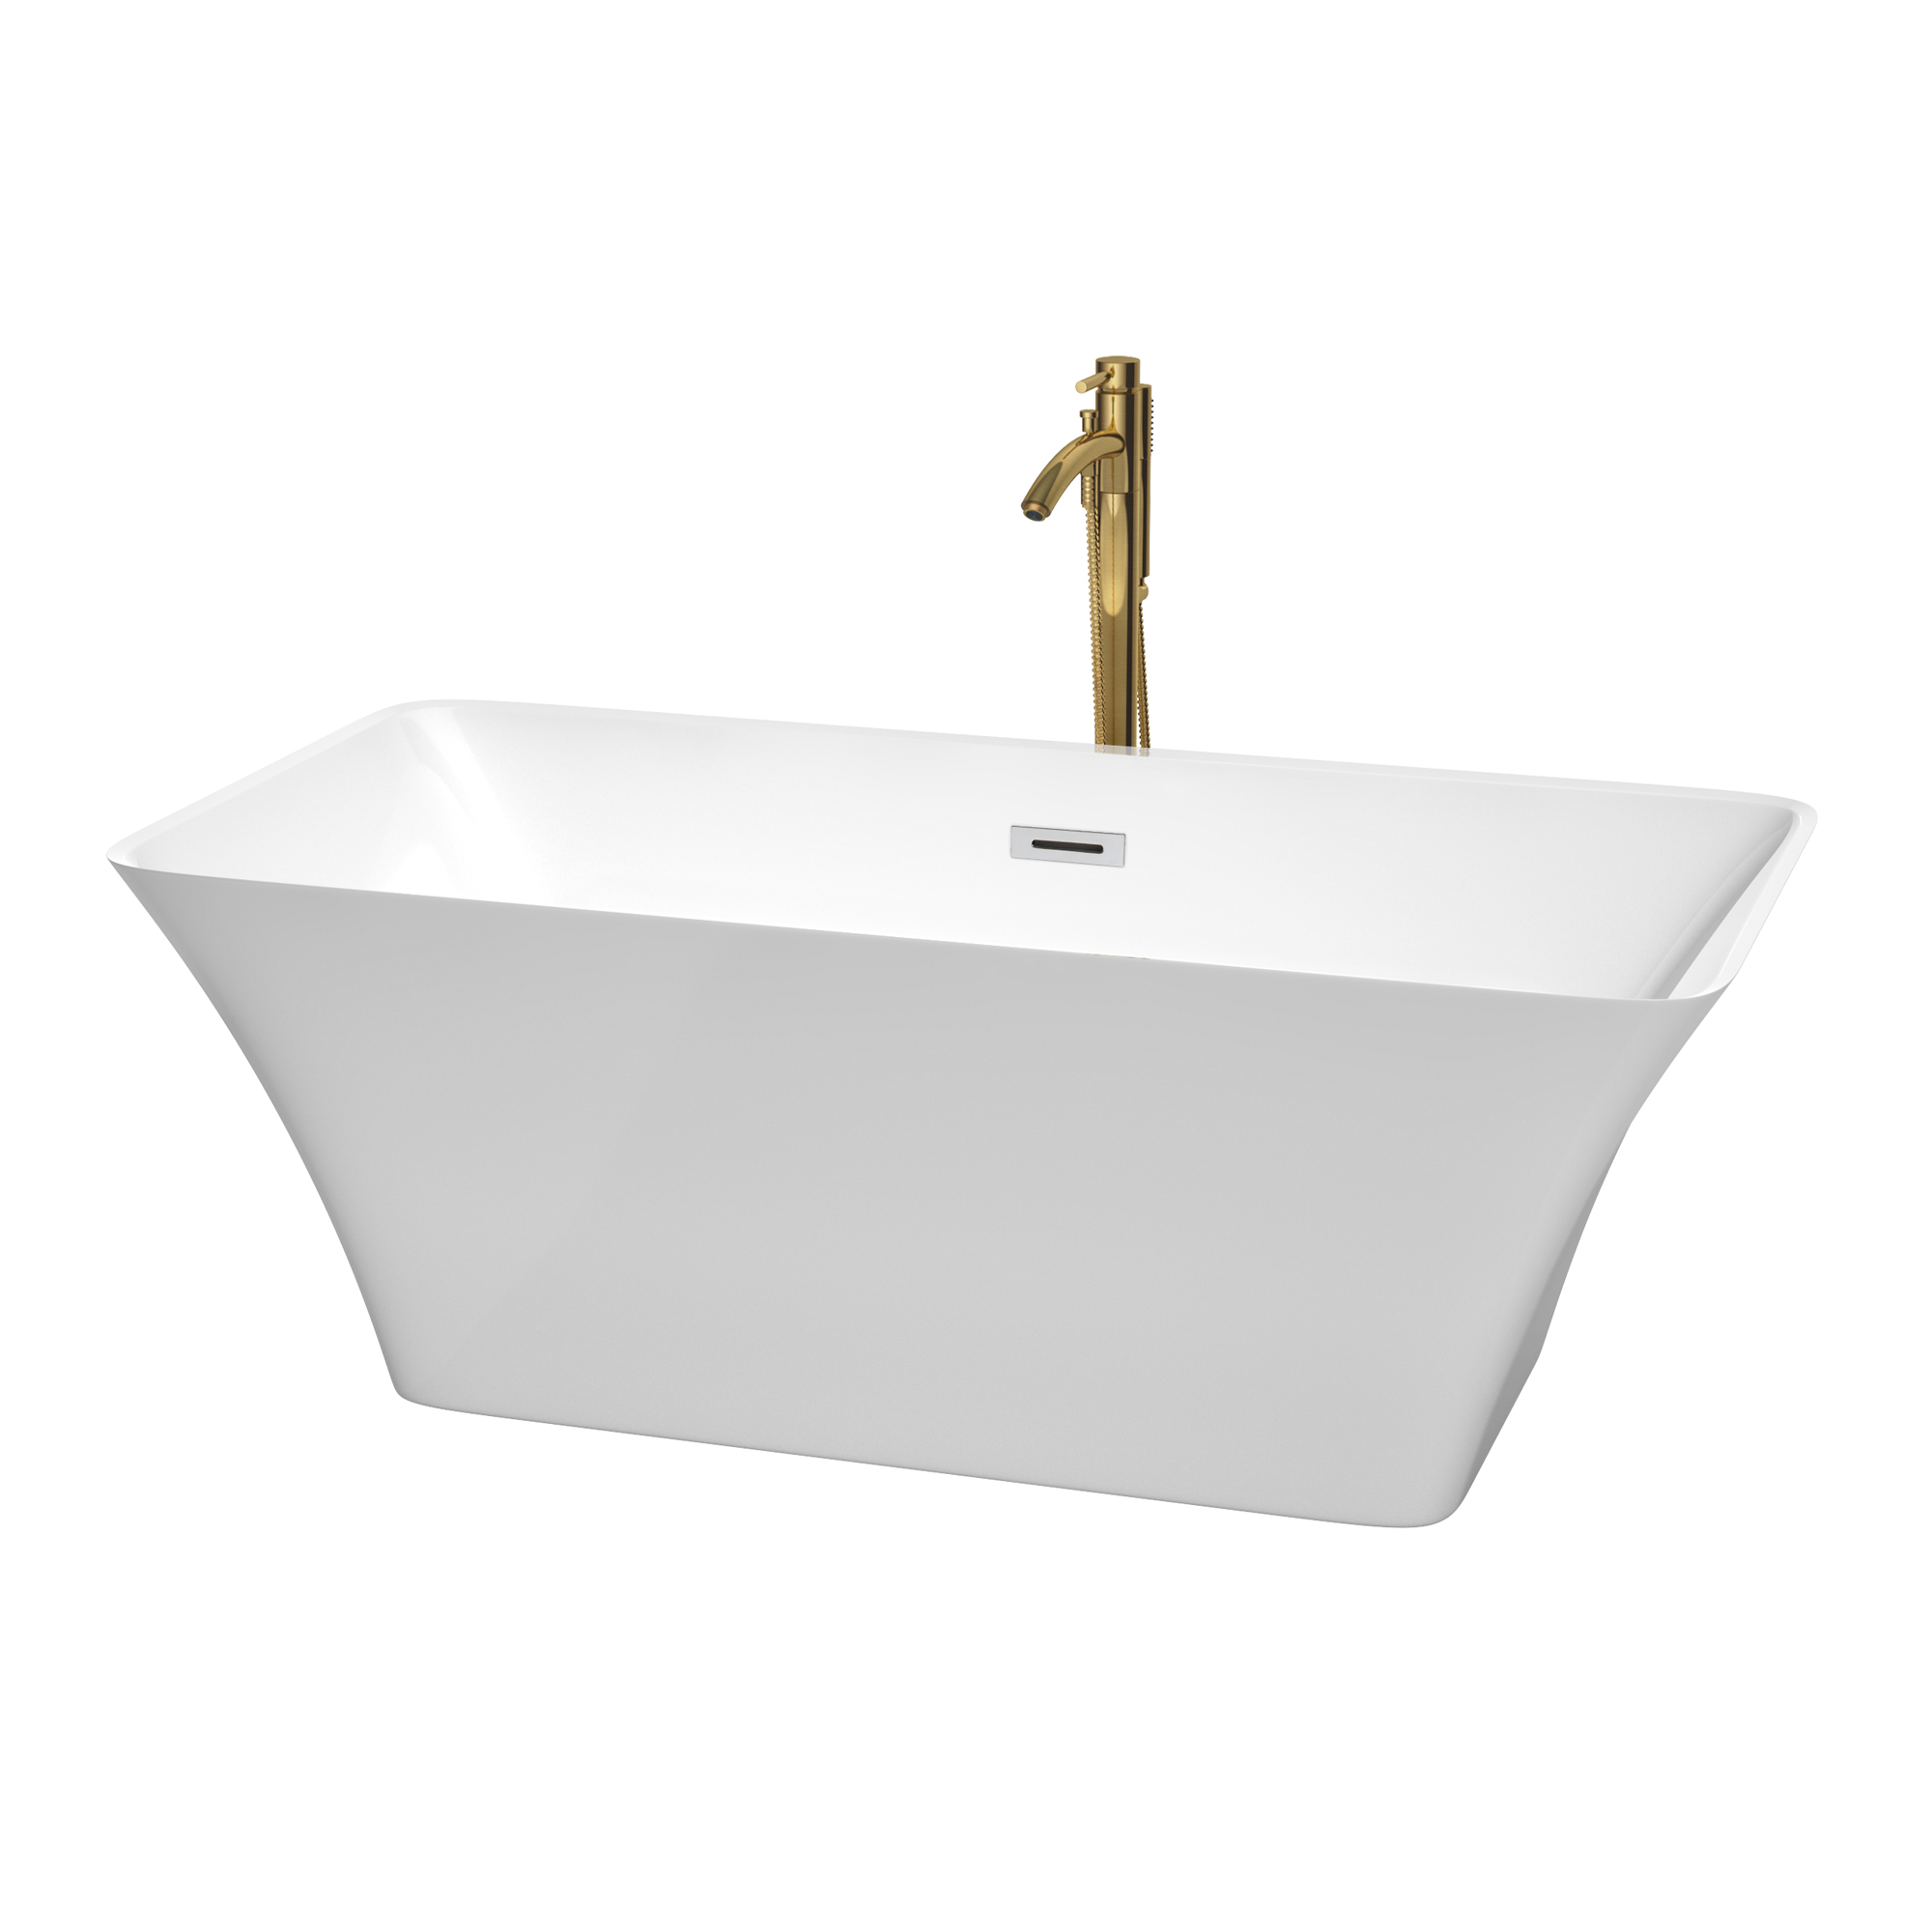 59" Freestanding Bathtub in White with Polished Chrome Trim and Floor Mounted Faucet in Brushed Gold